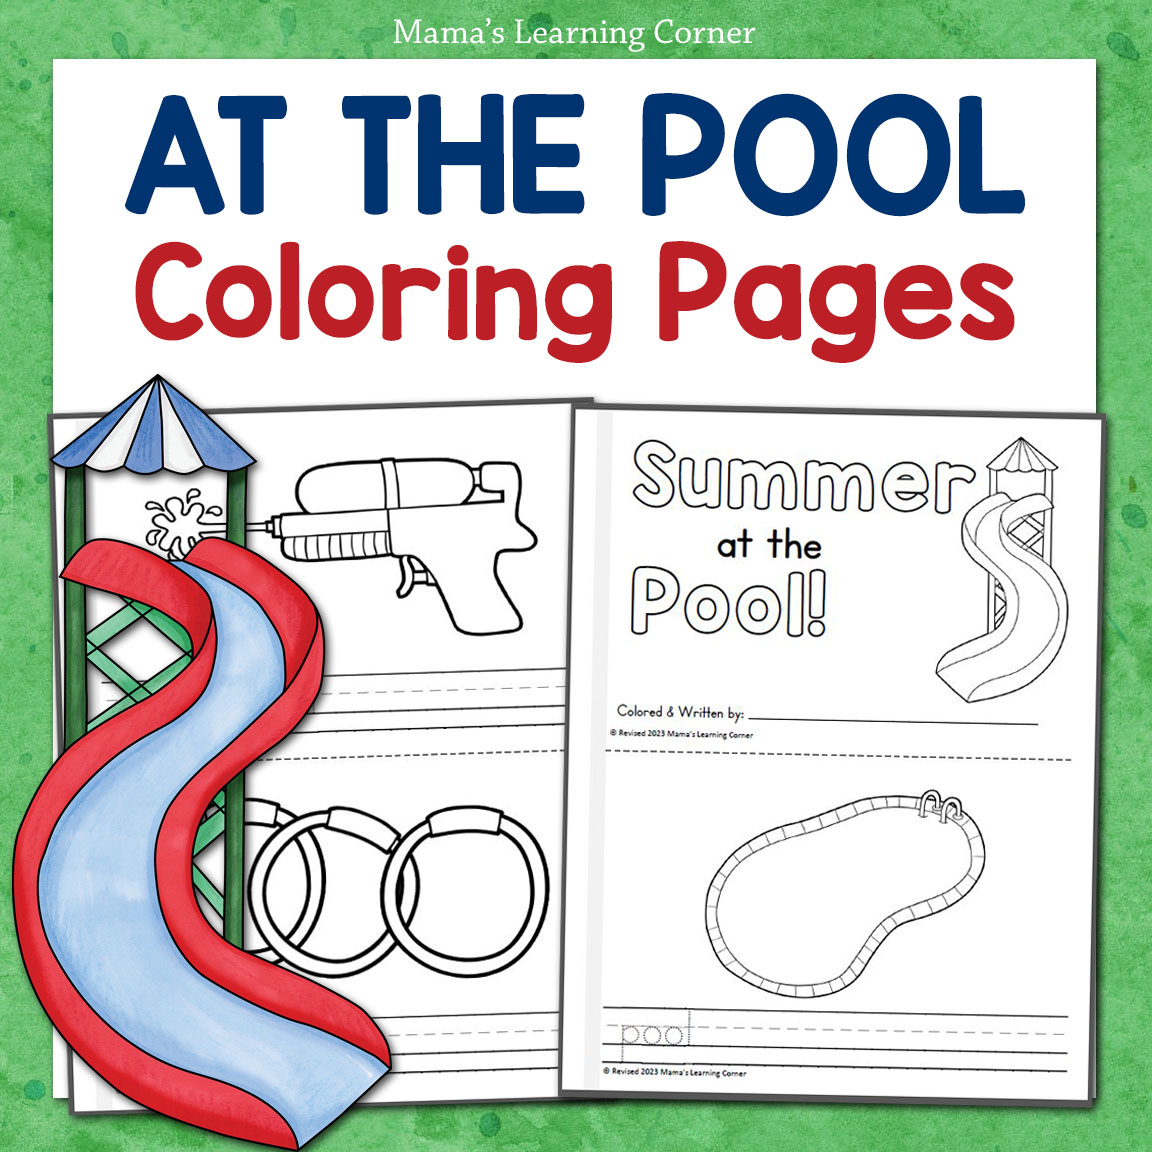 Summer coloring pages at the pool